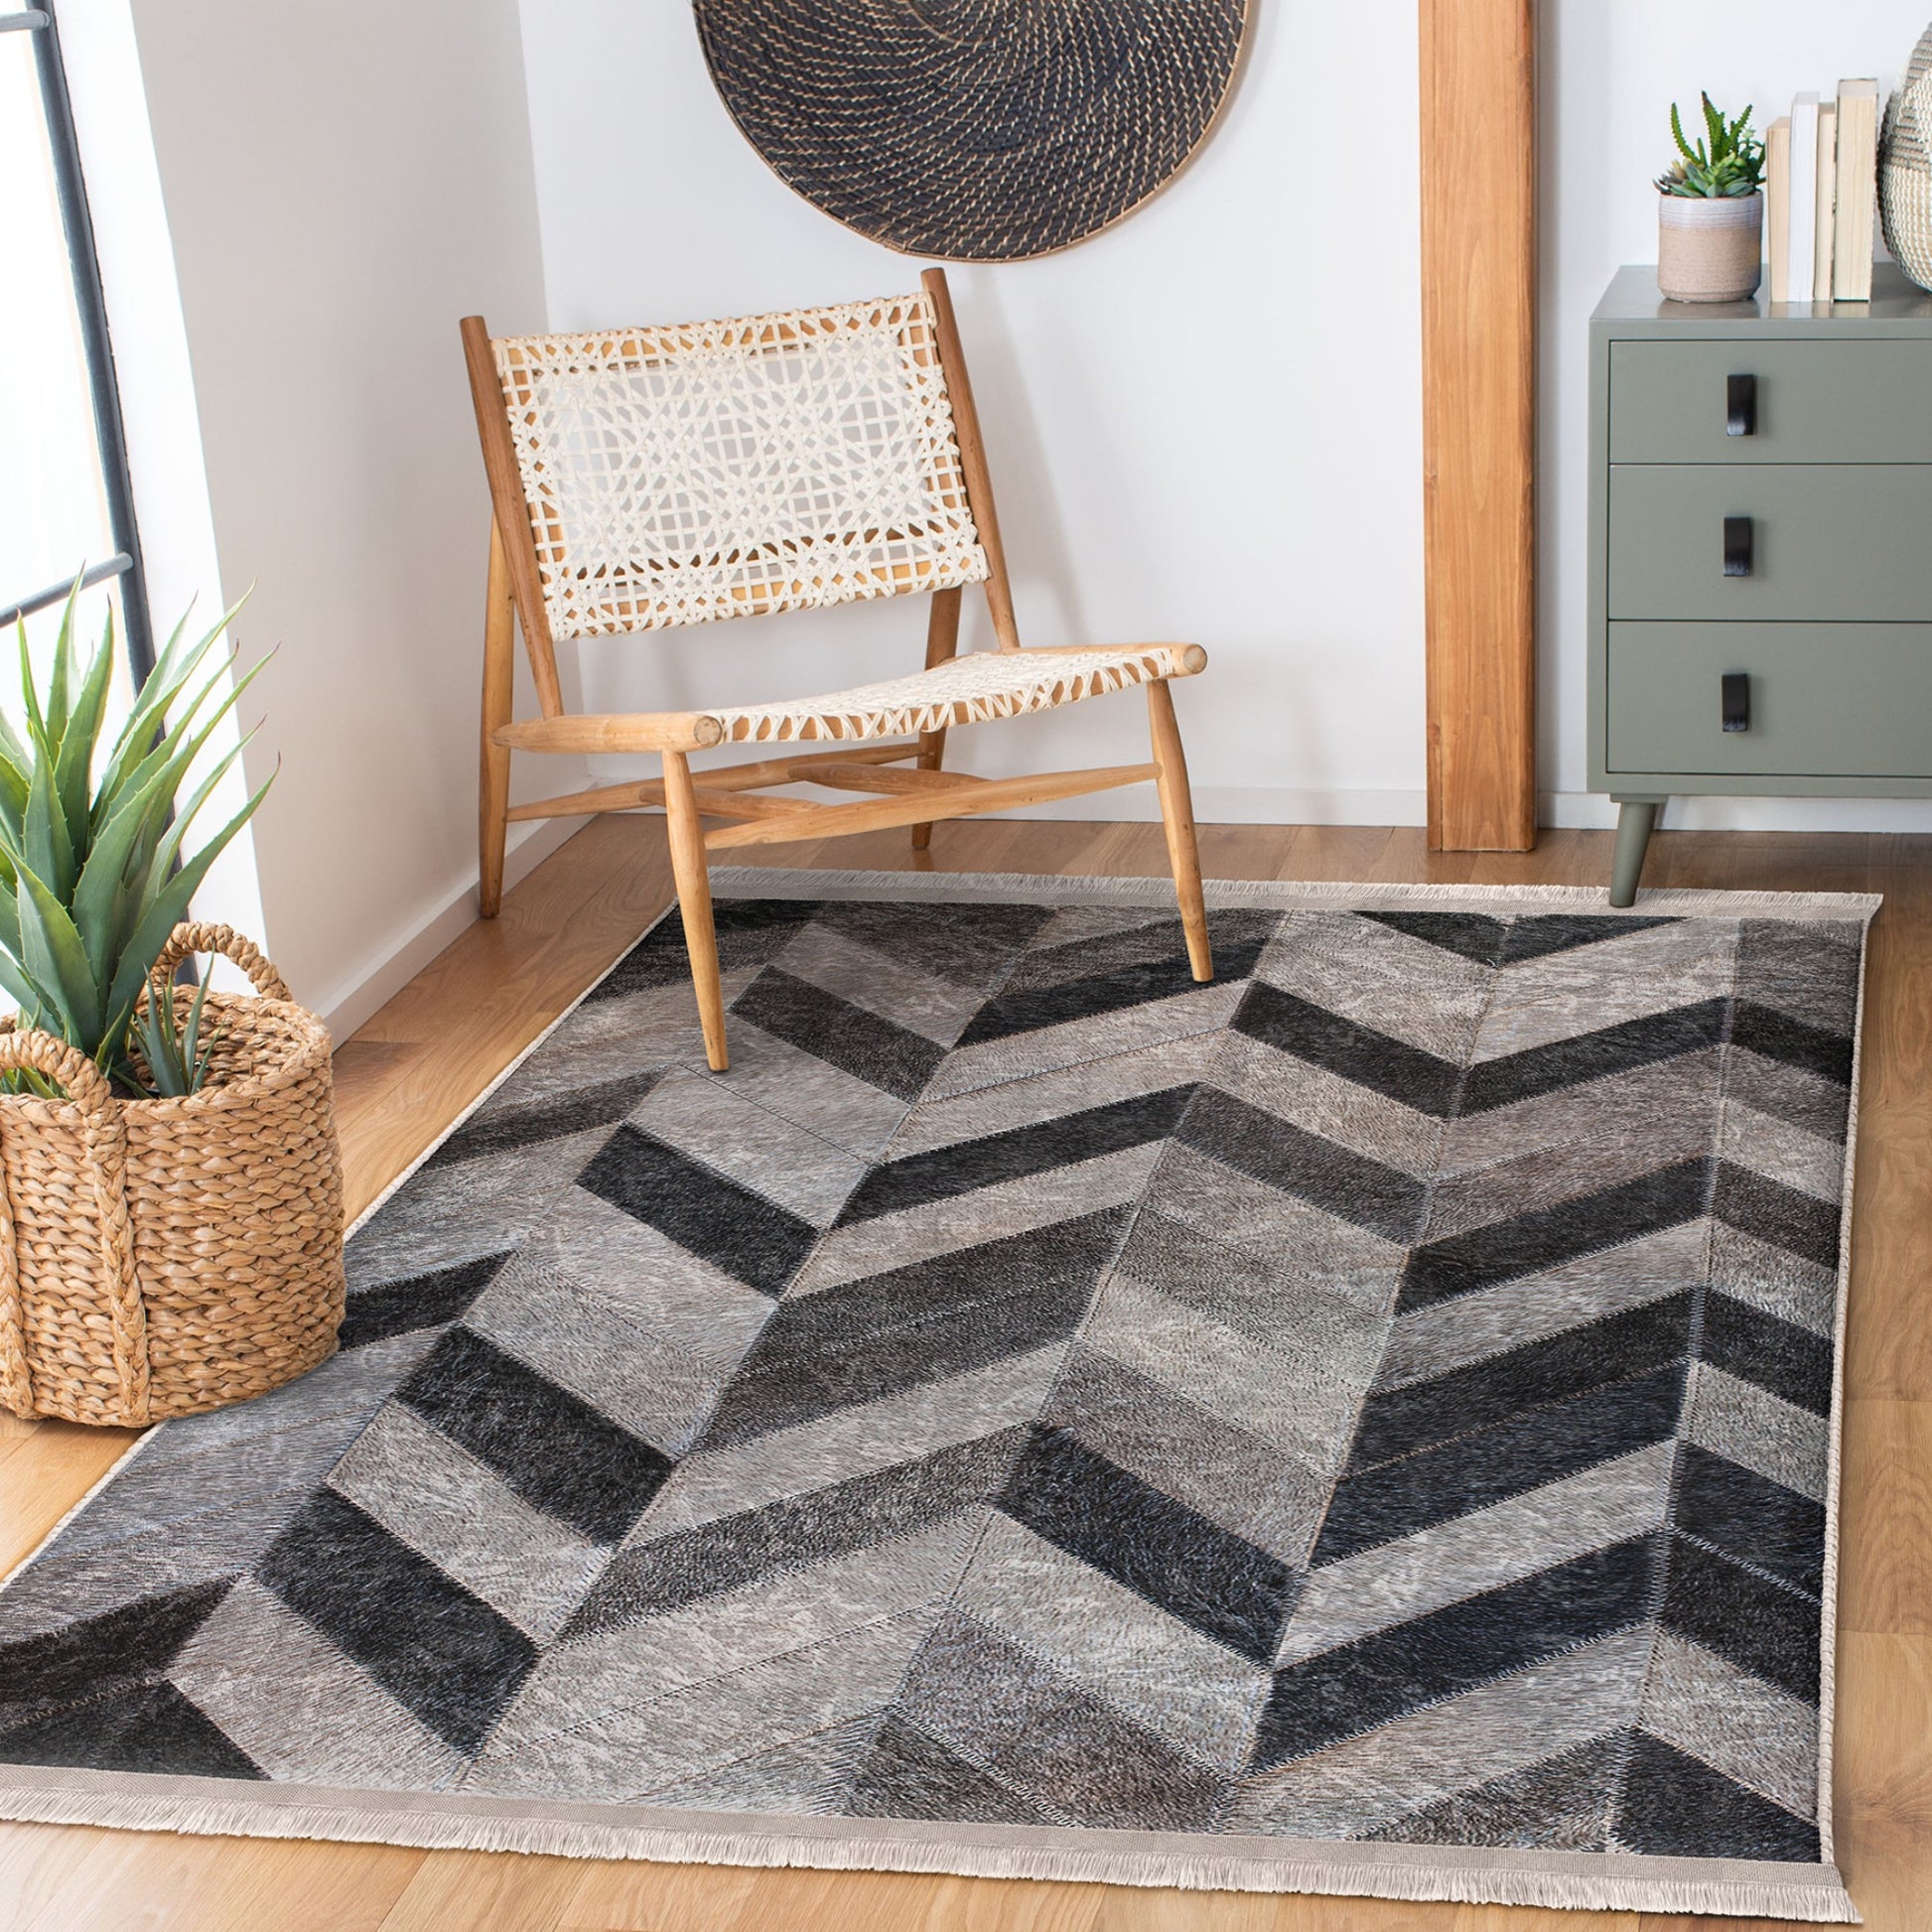 High-Quality Grey Tones Pattern Area Rug for Modern Decor